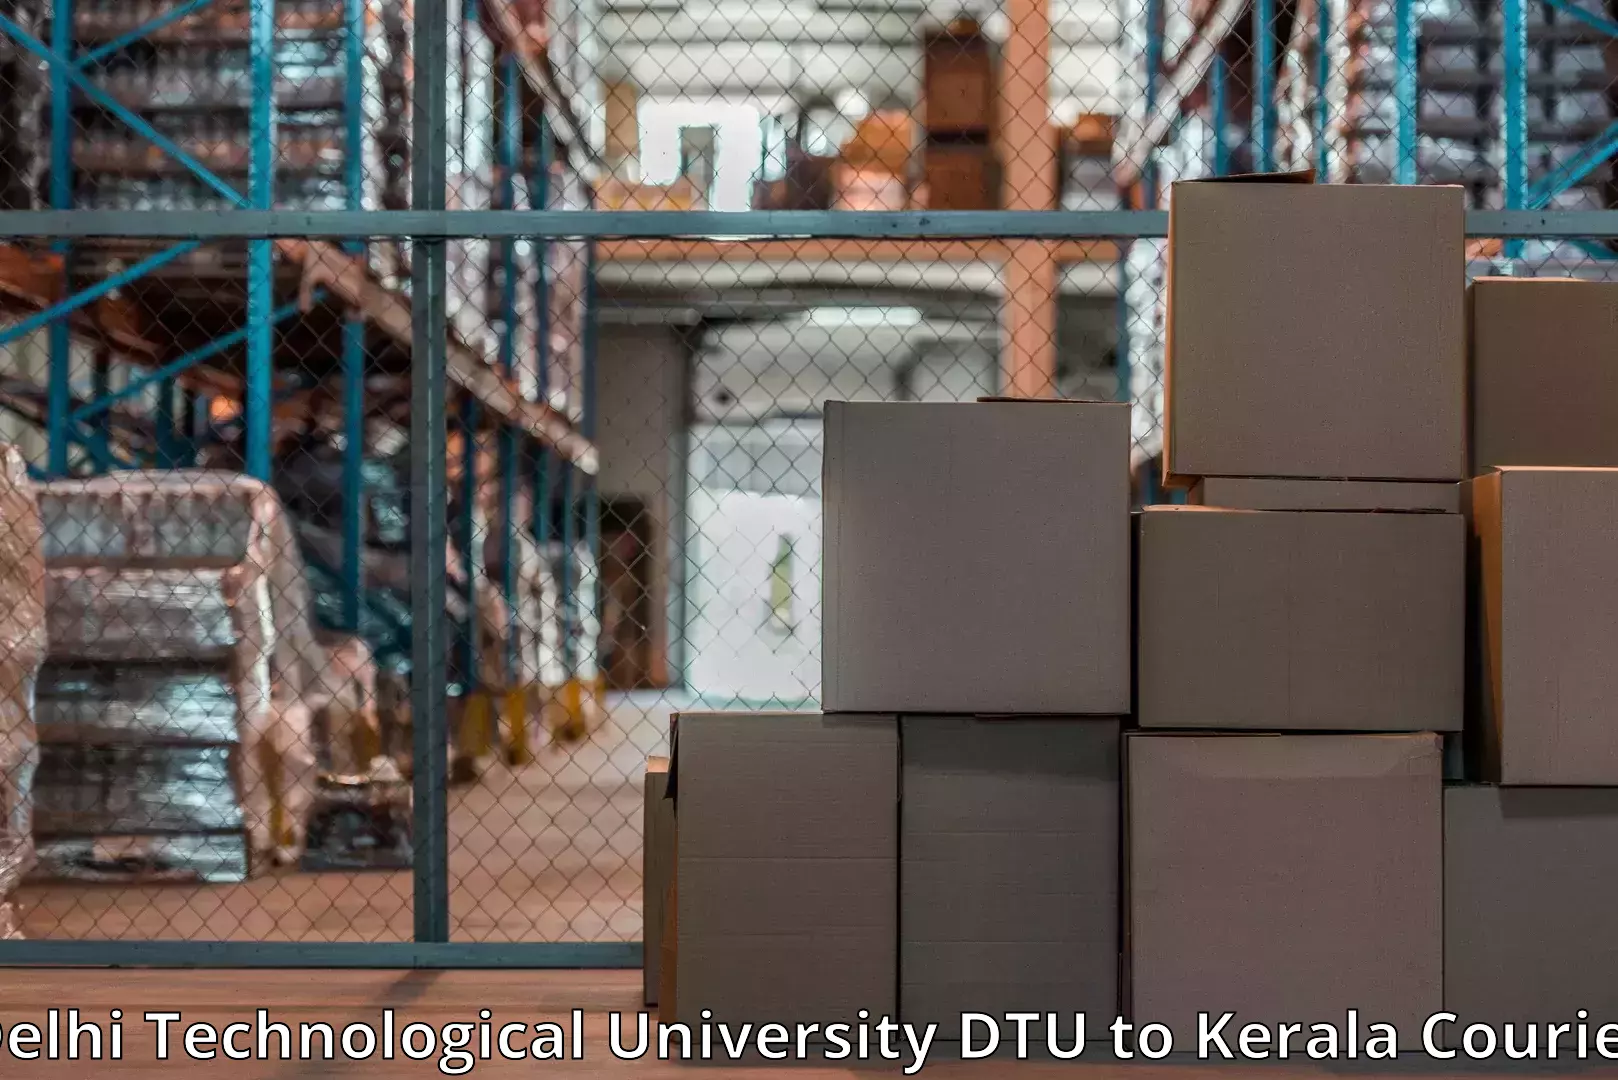 Cost-effective furniture movers Delhi Technological University DTU to Allepey